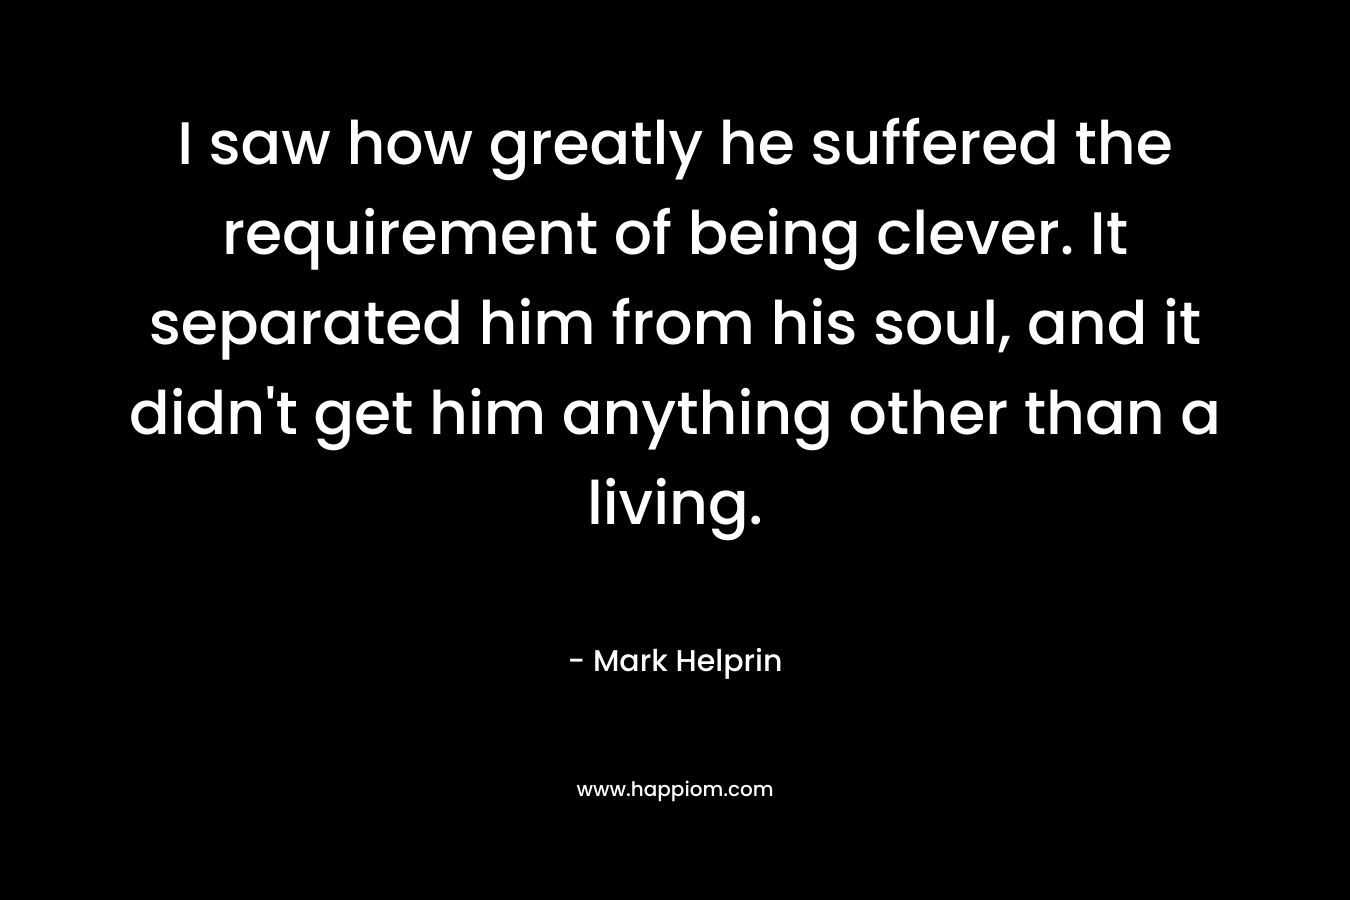 I saw how greatly he suffered the requirement of being clever. It separated him from his soul, and it didn’t get him anything other than a living. – Mark Helprin